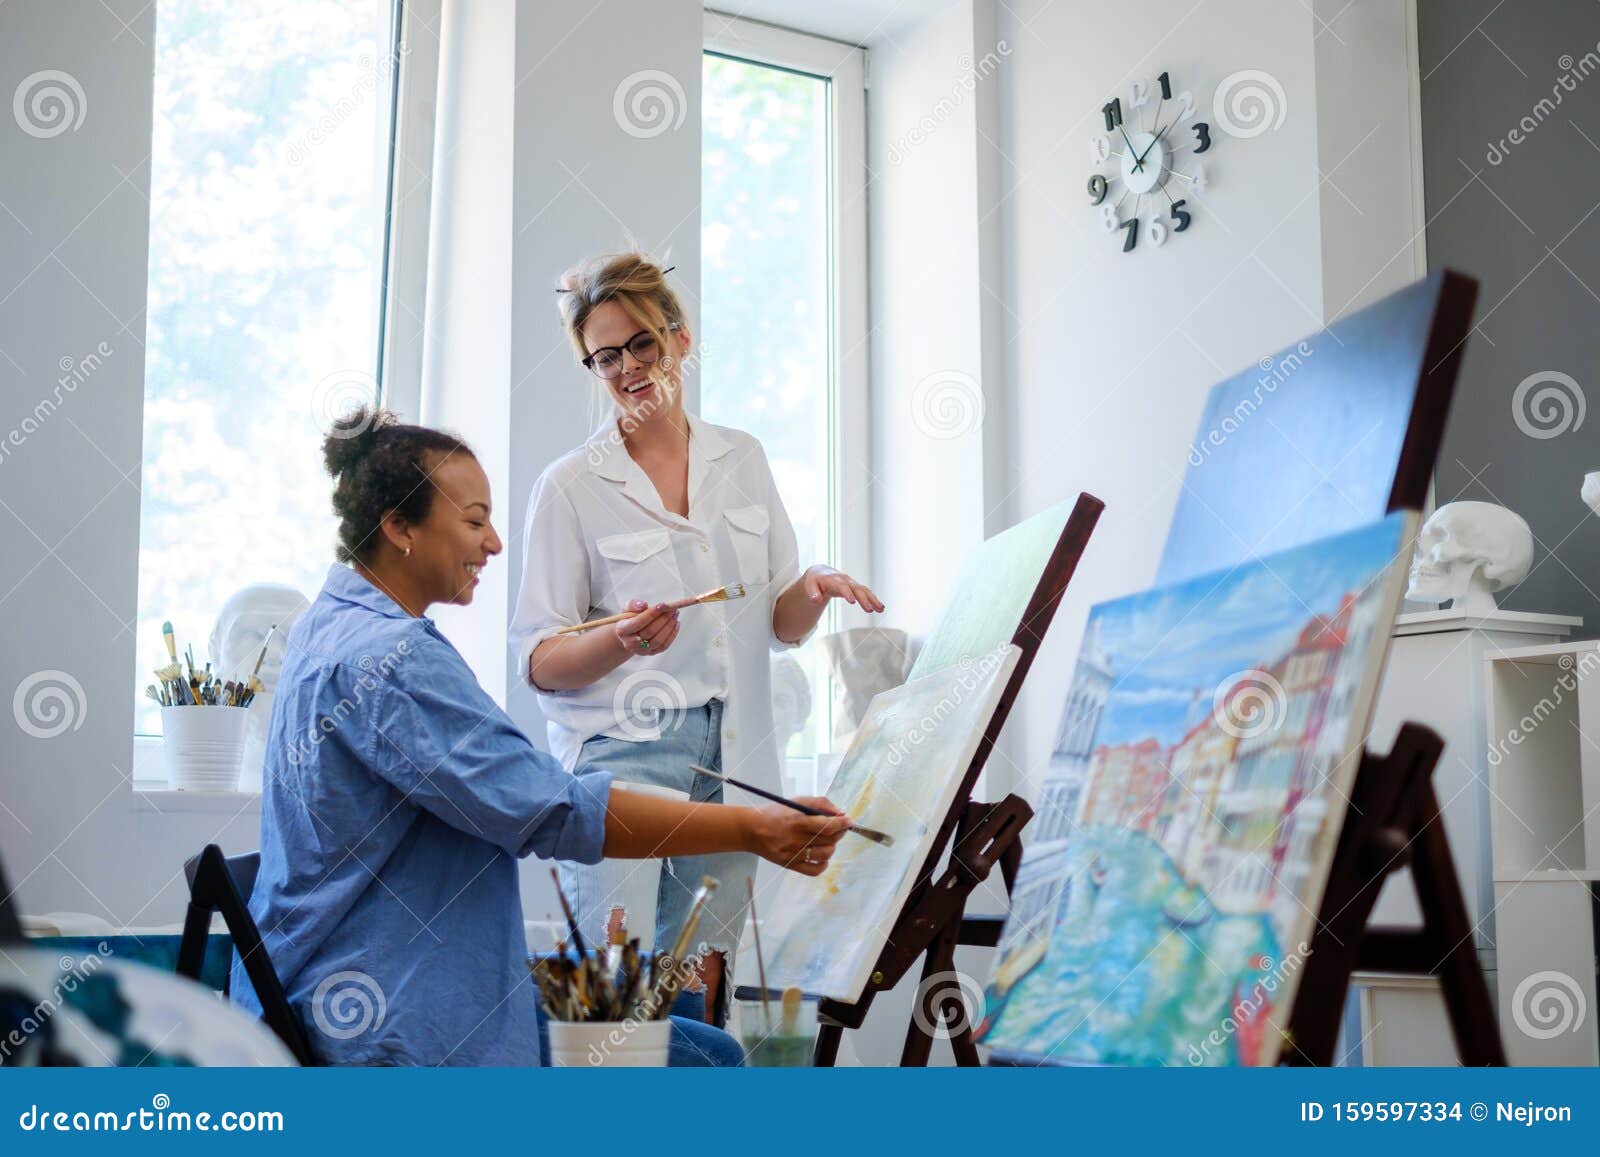 creative painter and her protege working in a studio